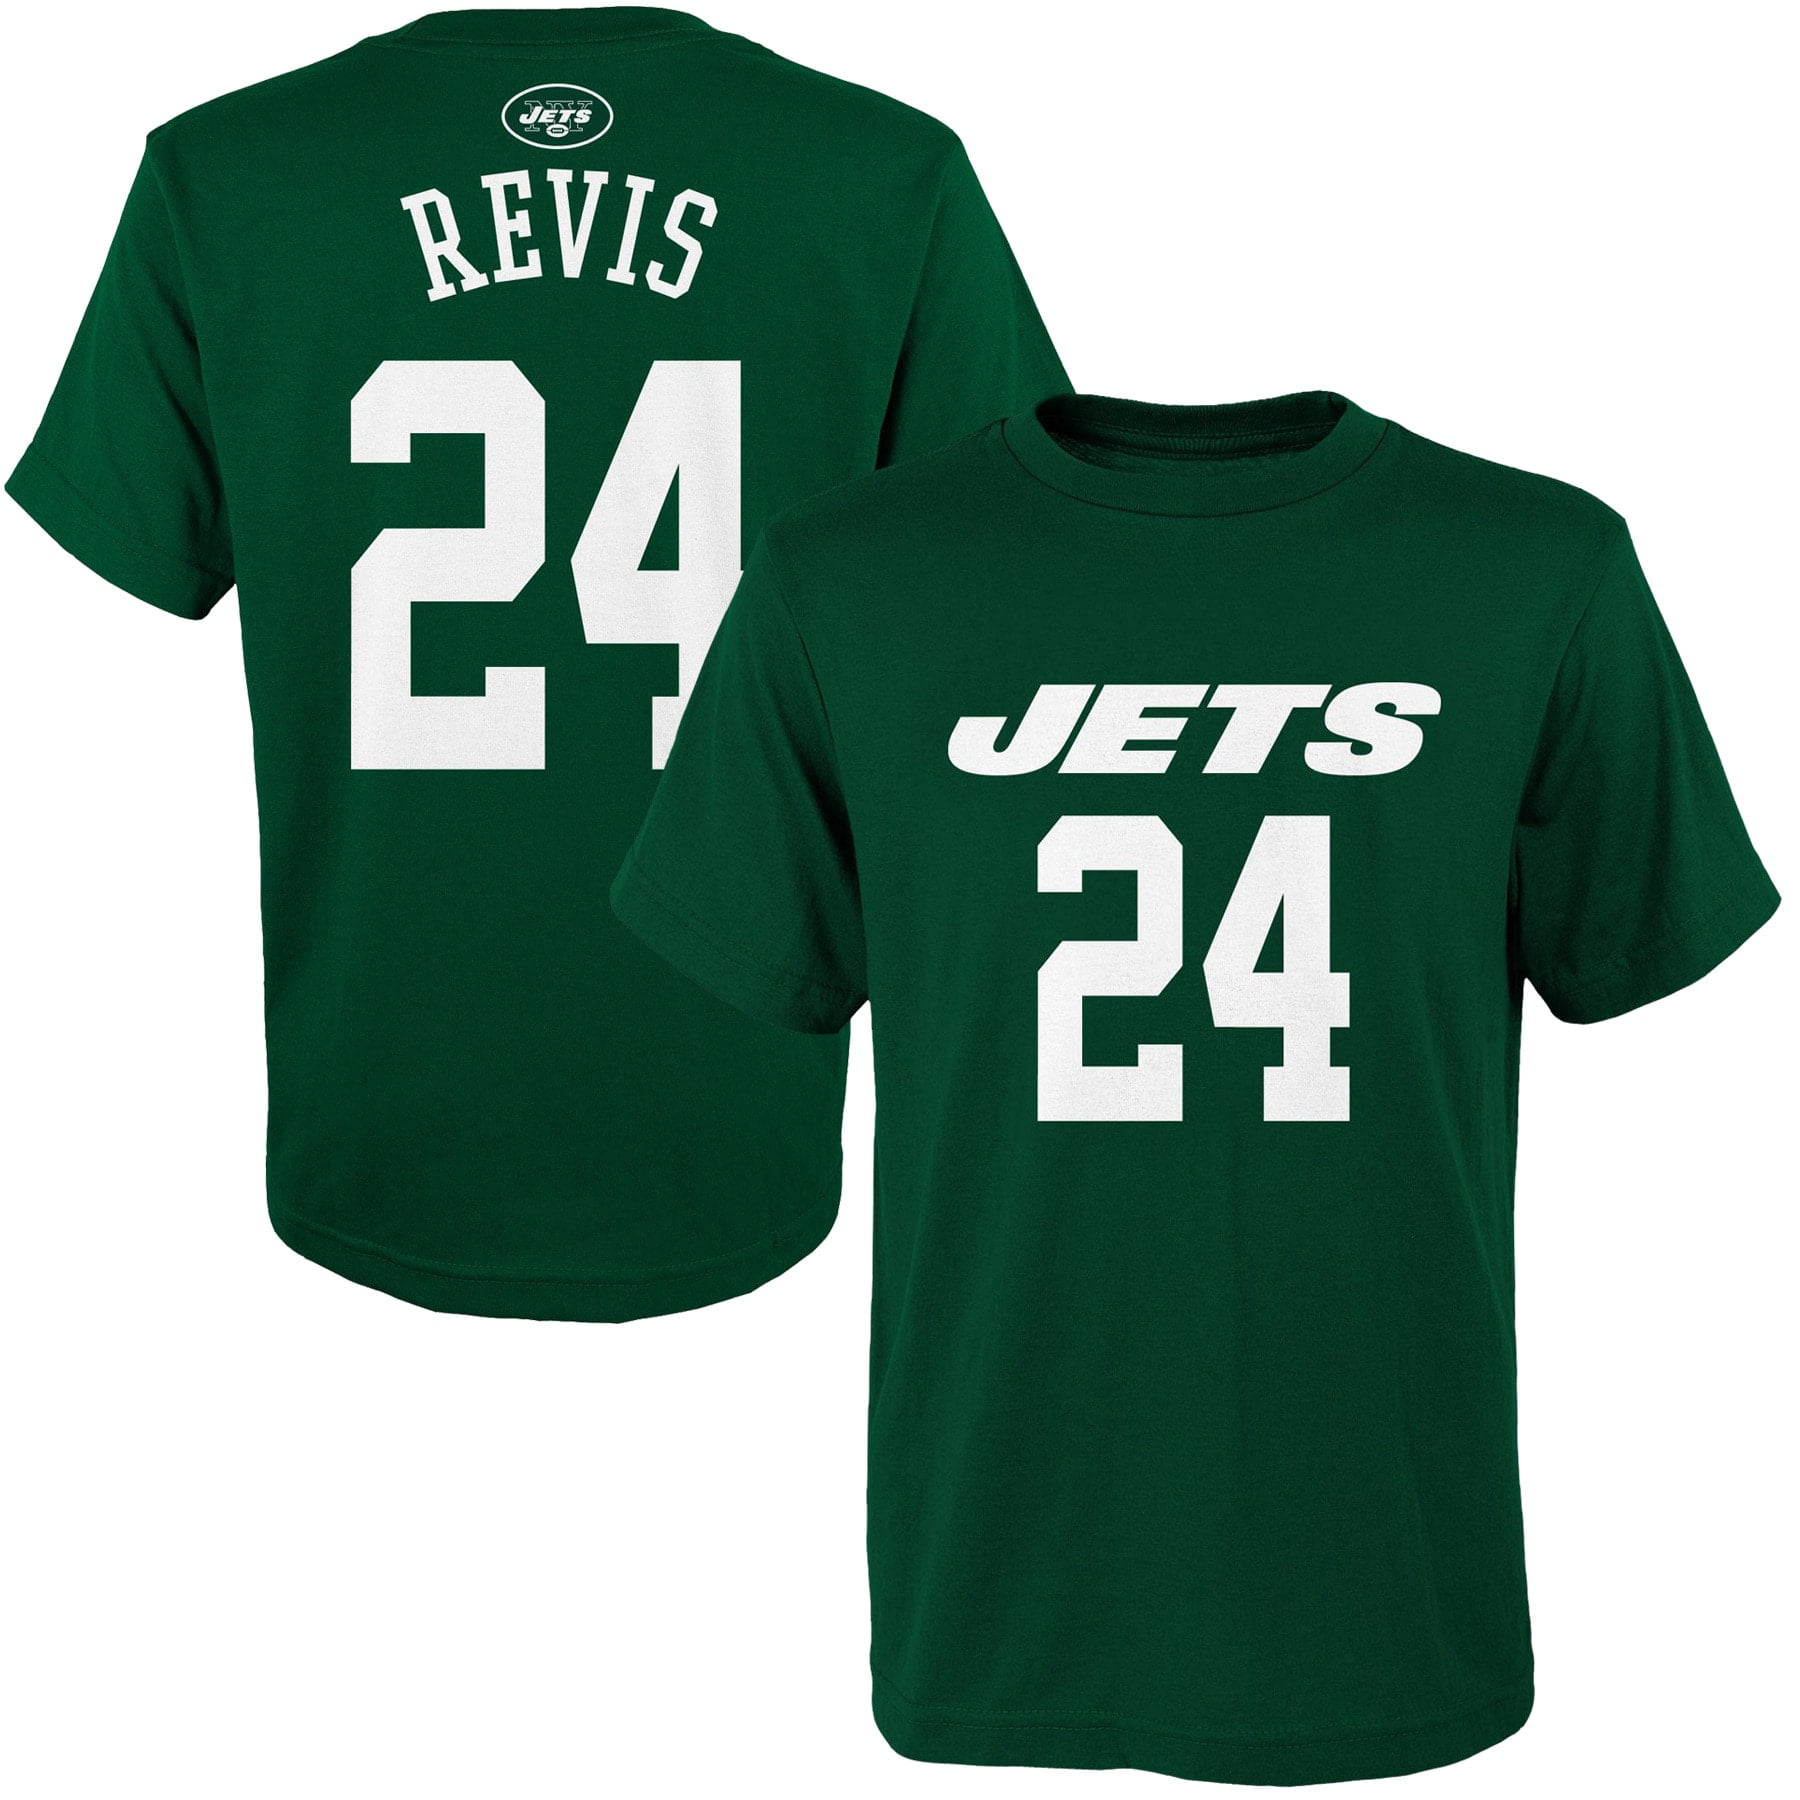 revis toddler jersey